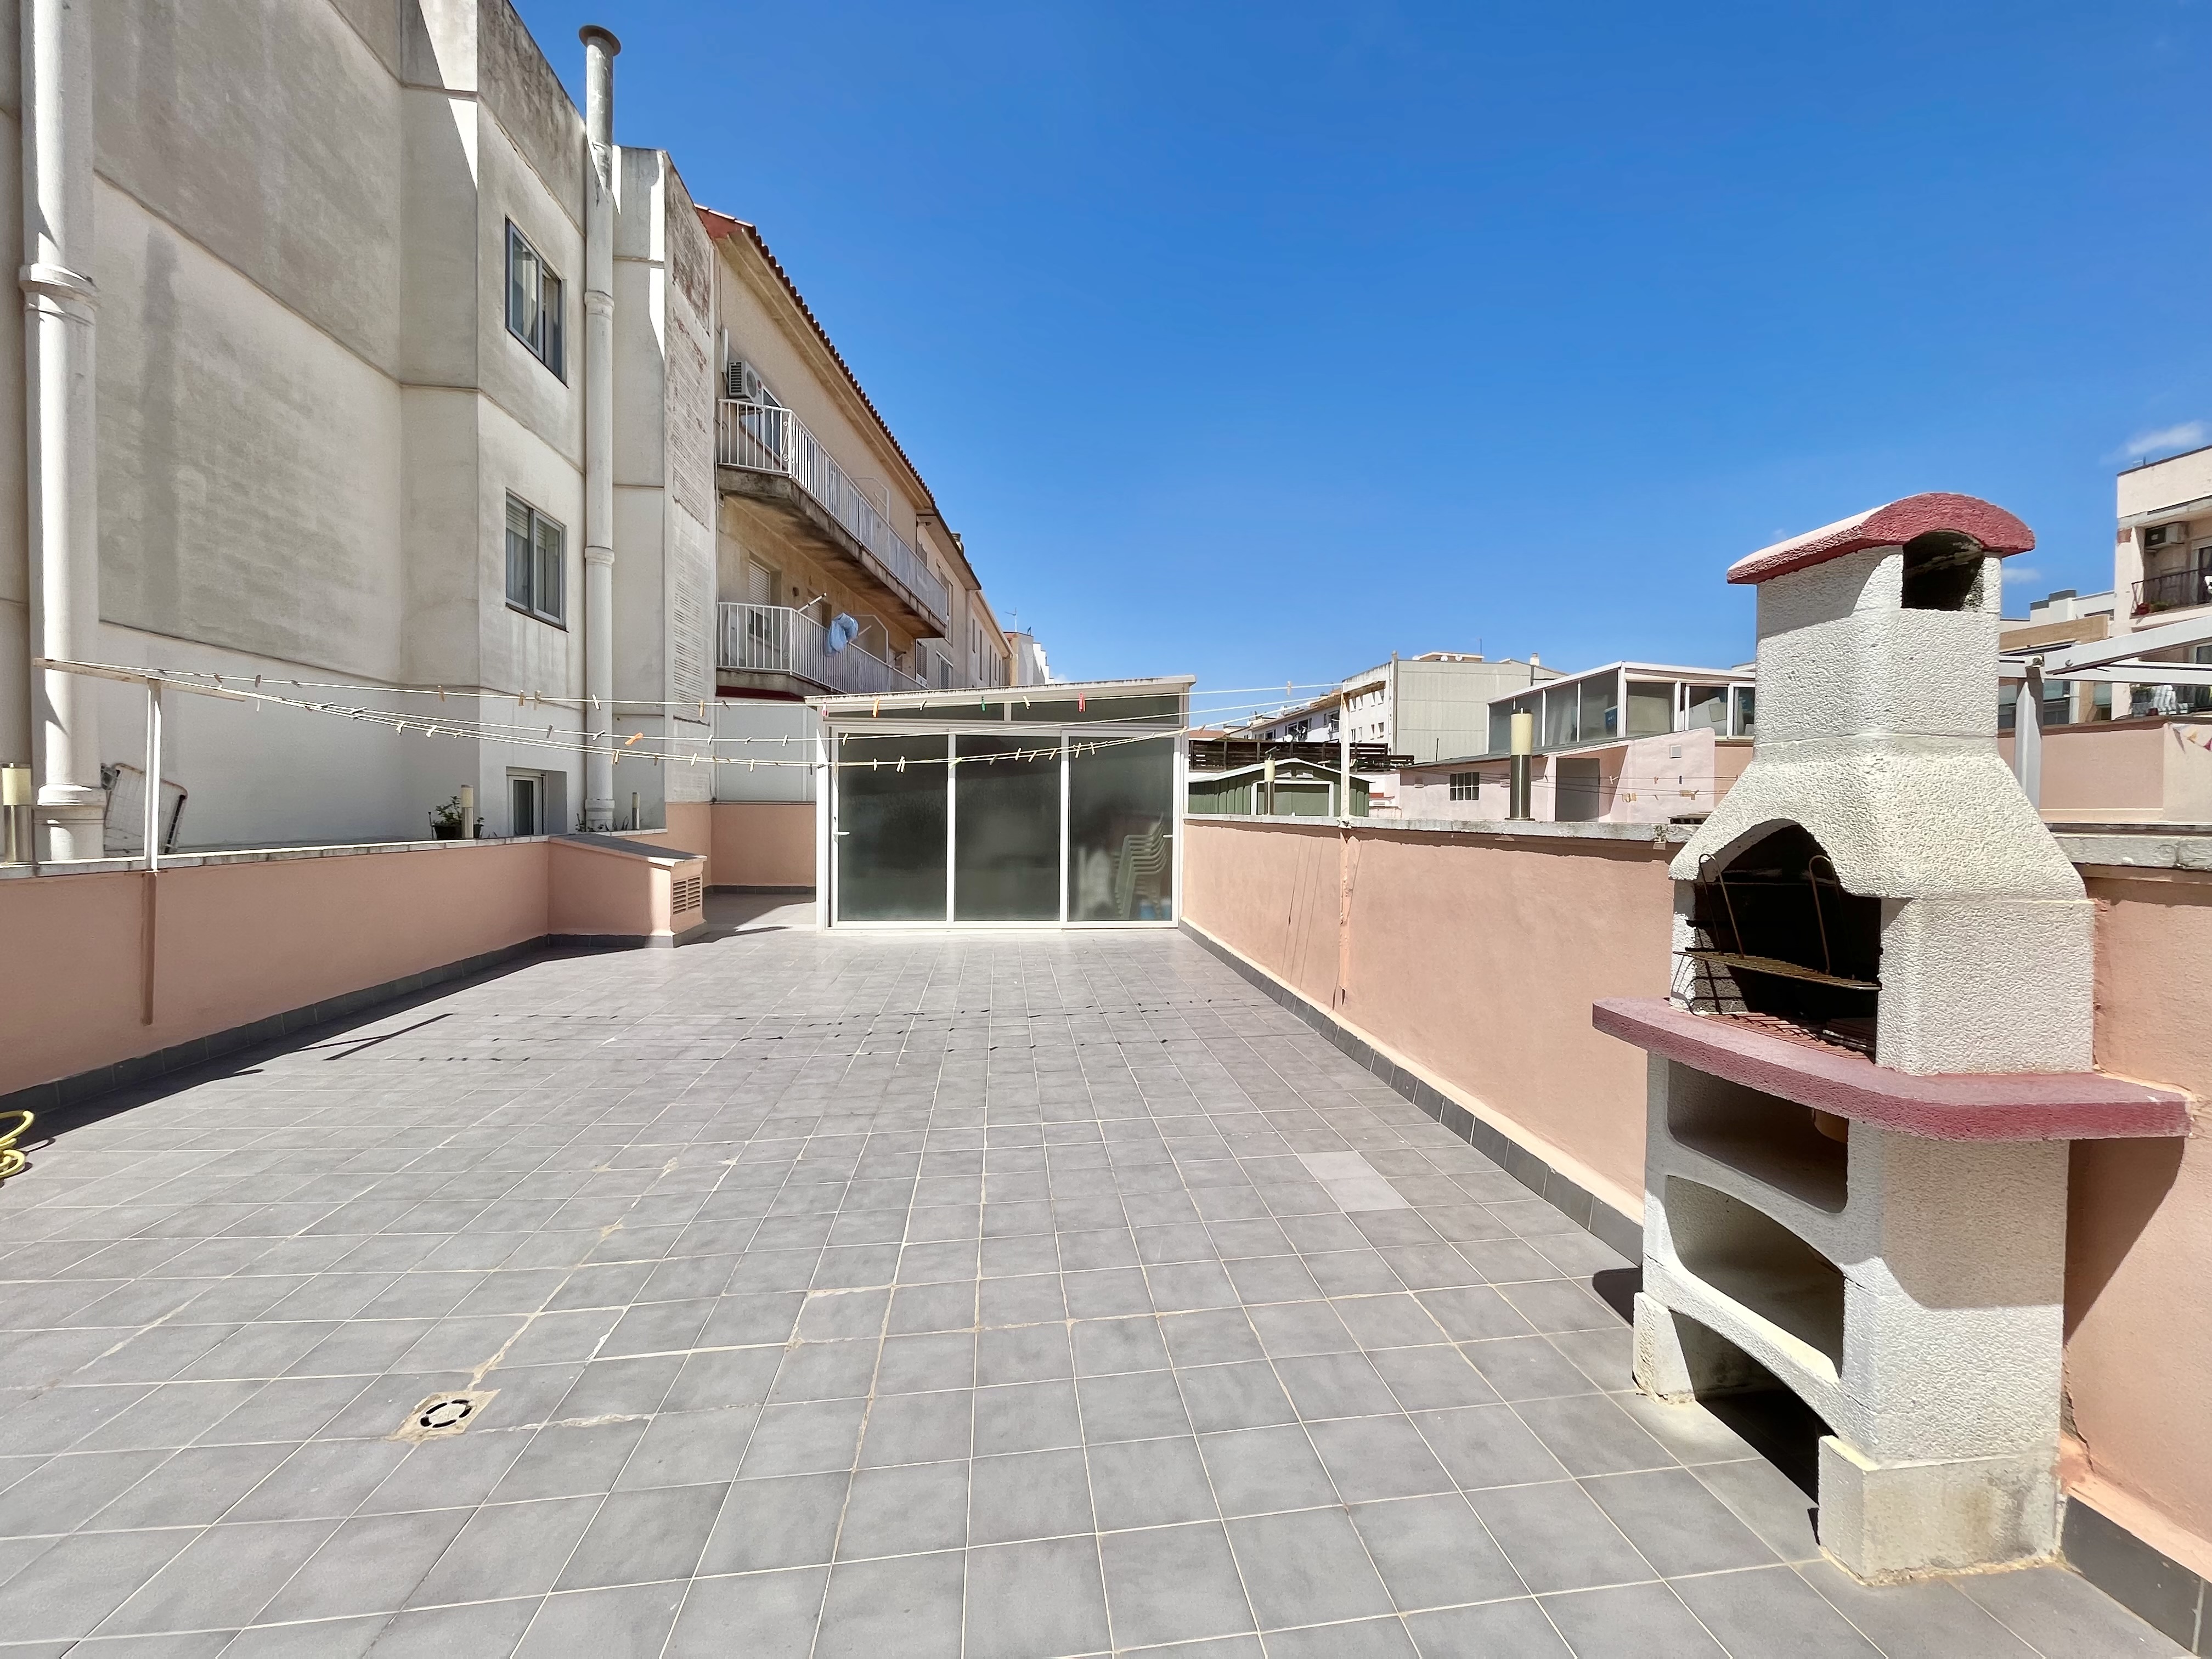 Apartment in the center of Rosas with a large private terrace